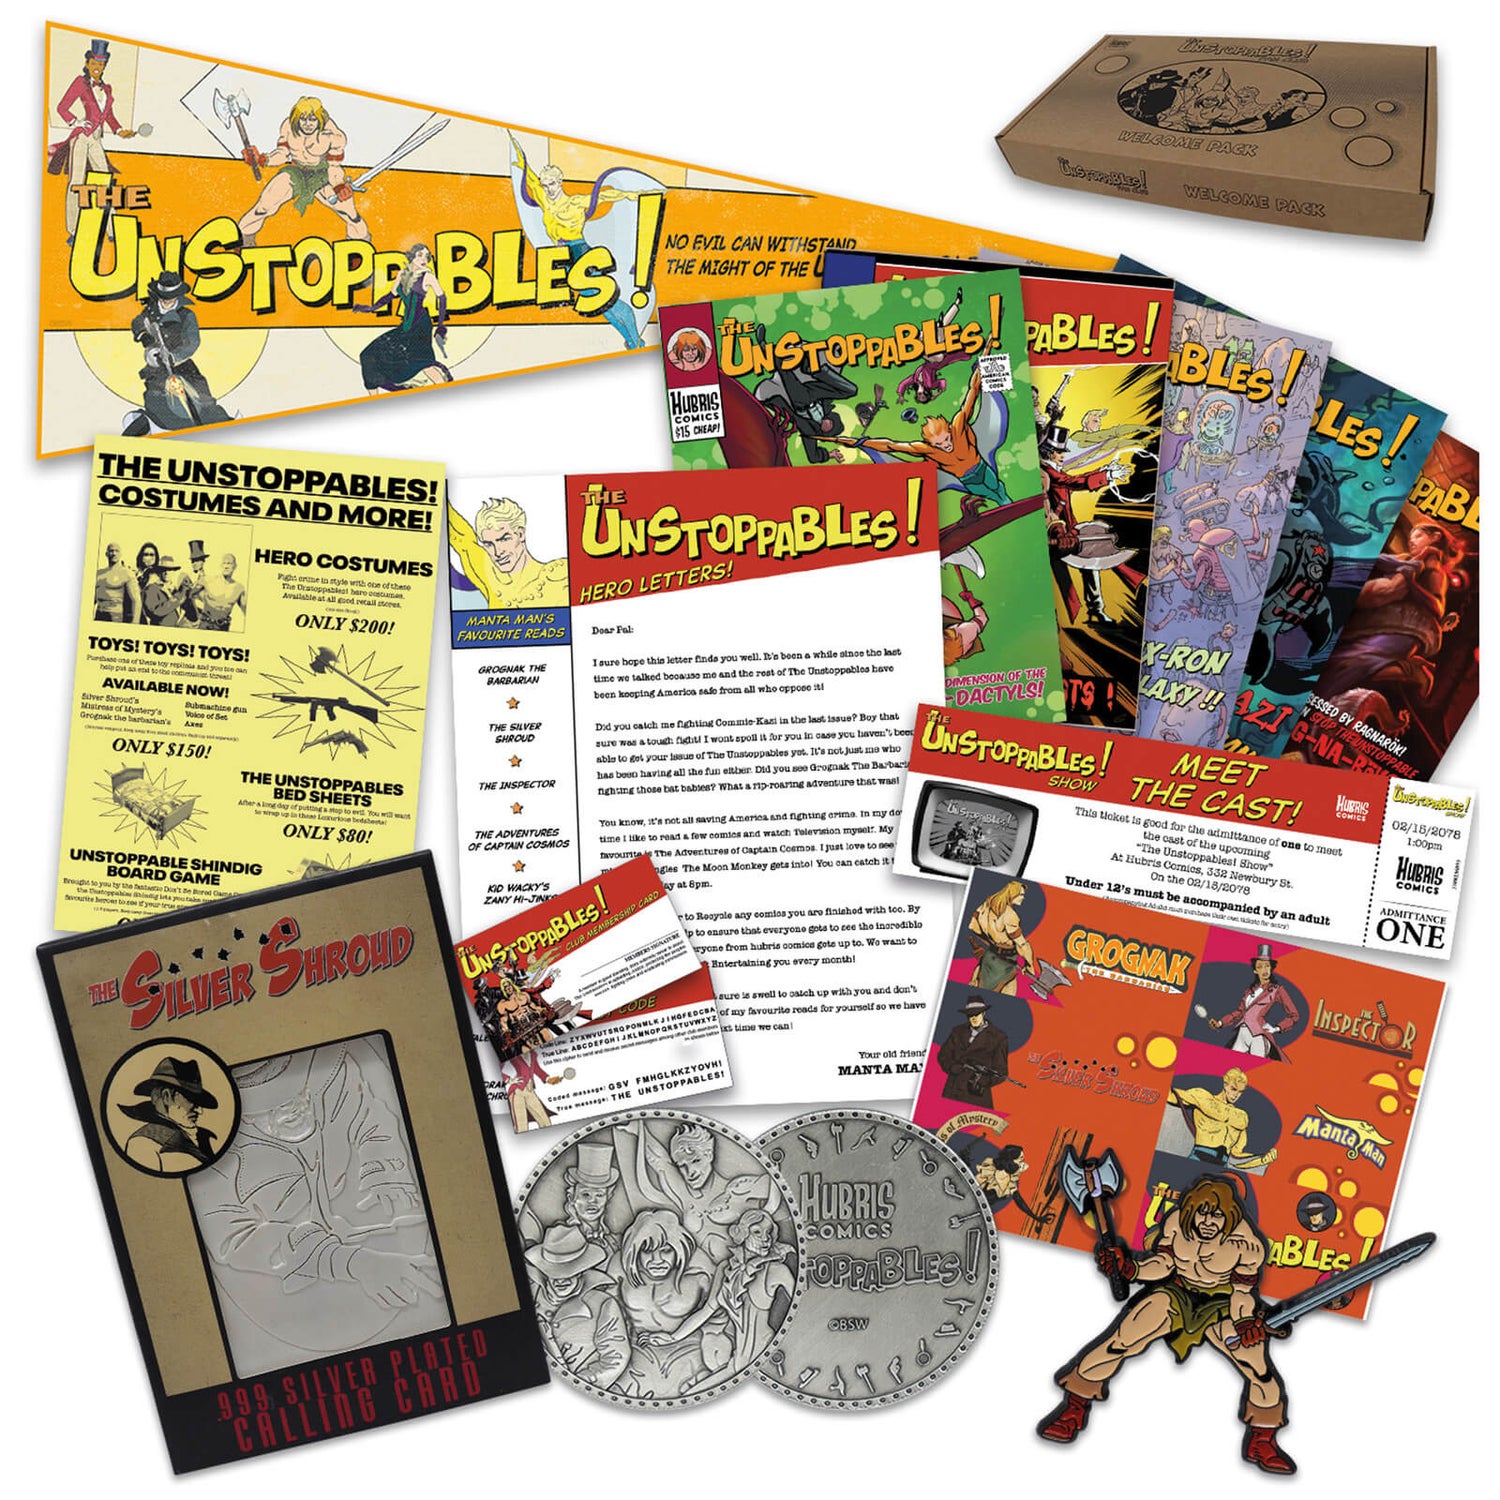 Fallout "The Unstoppables" Limited Edition Collectors' Box